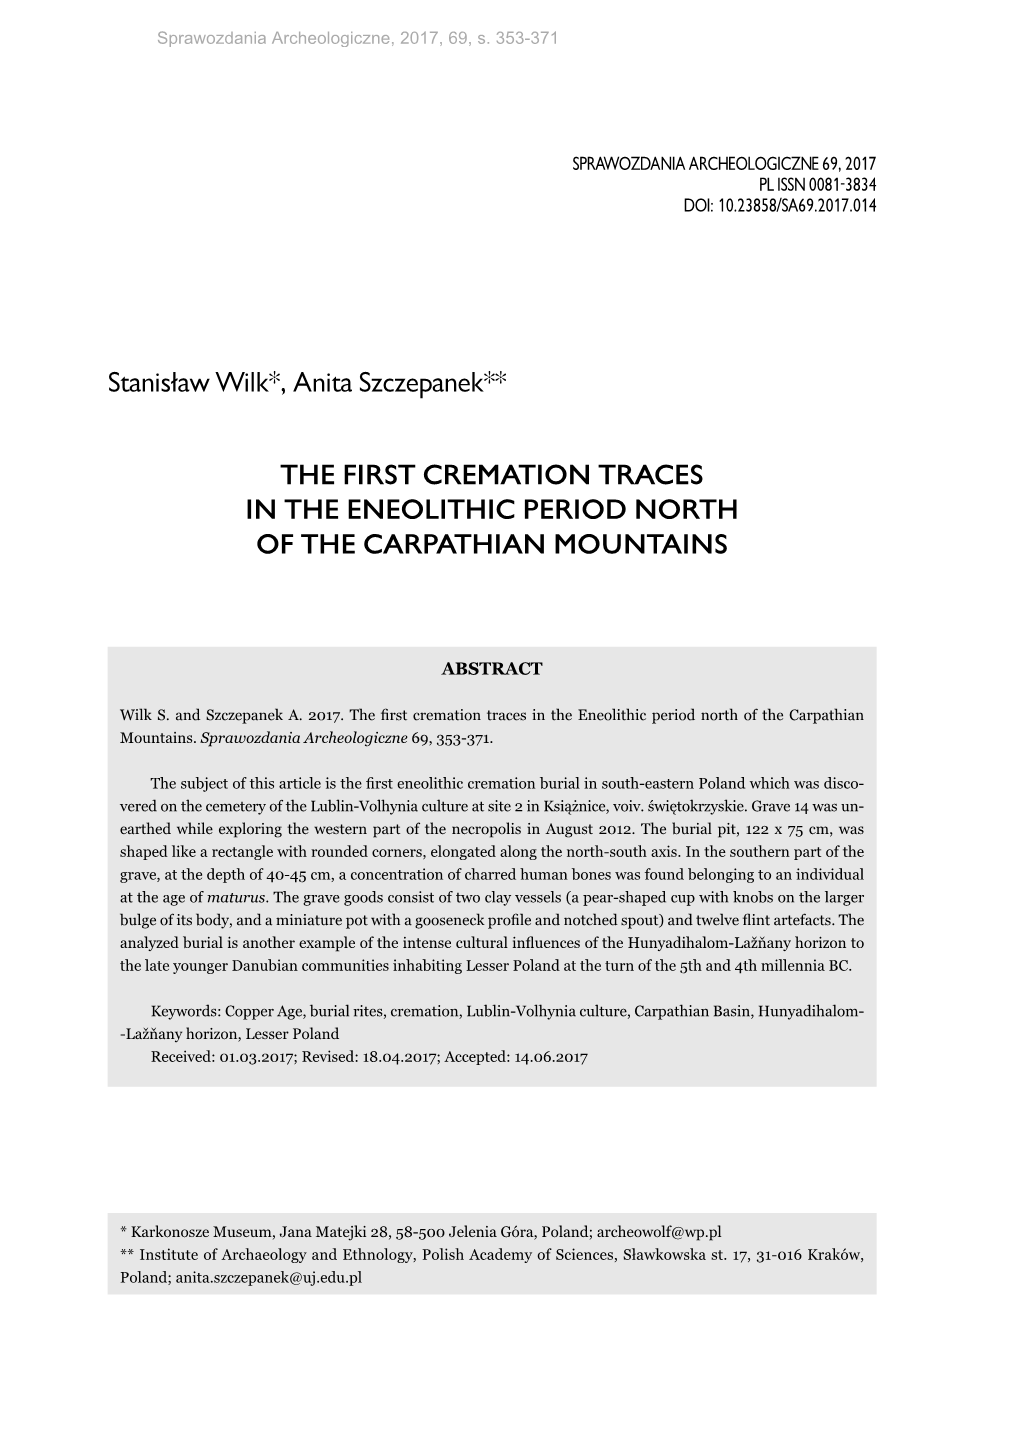 The First Cremation Traces in the Eneolithic Period North of the Carpathian Mountains